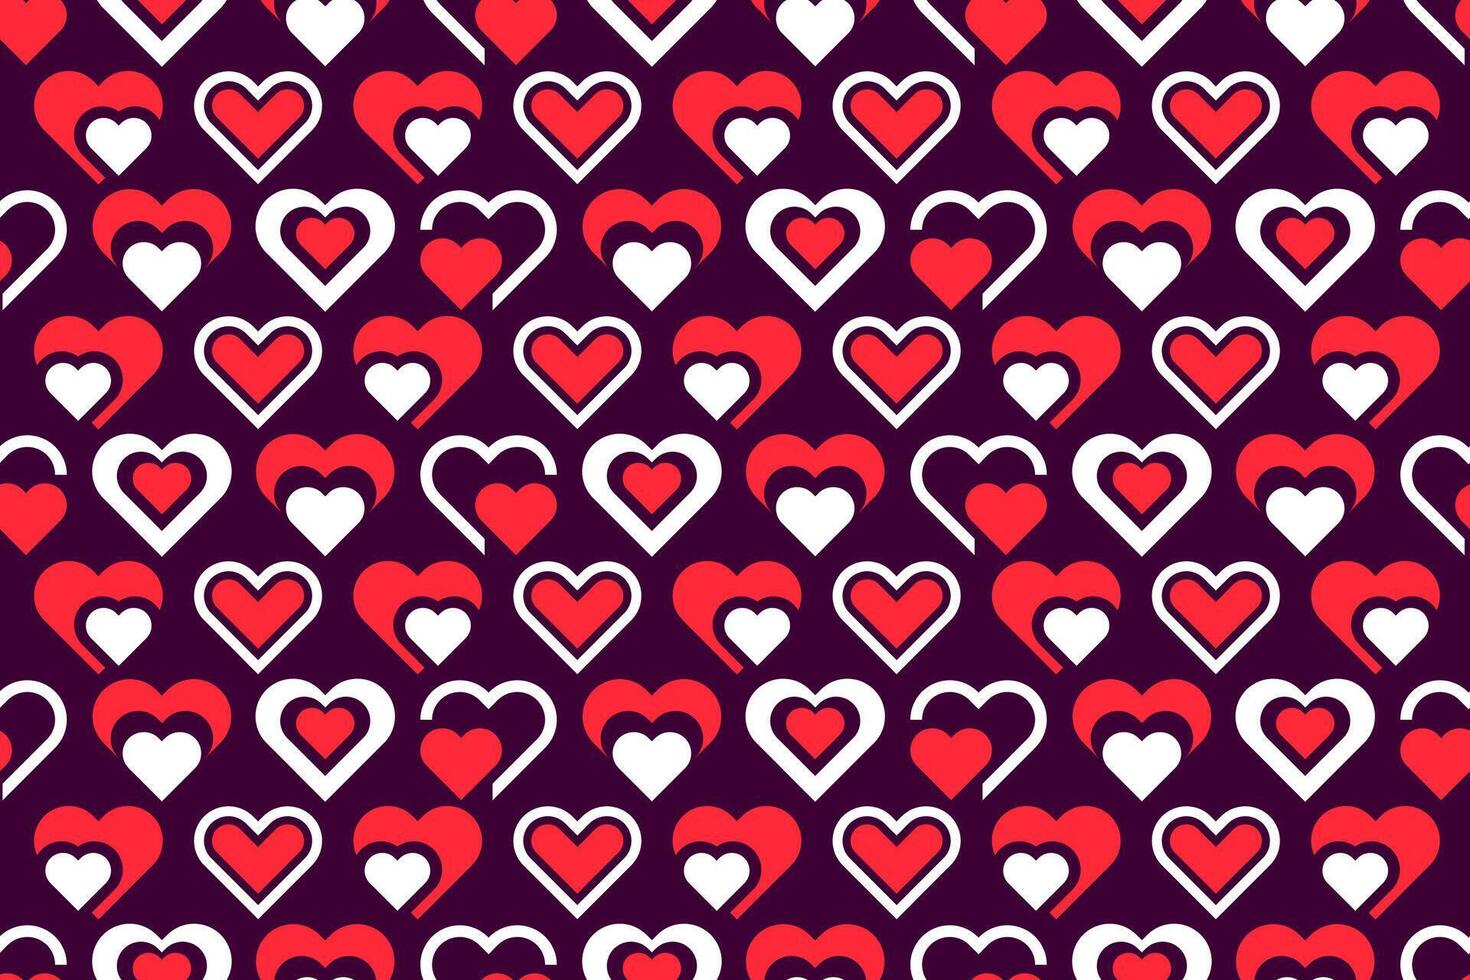 Abstract seamless red and white colored decorative, stylized geometric hearts. Endless repeating heart shapes, abstract pattern design vector